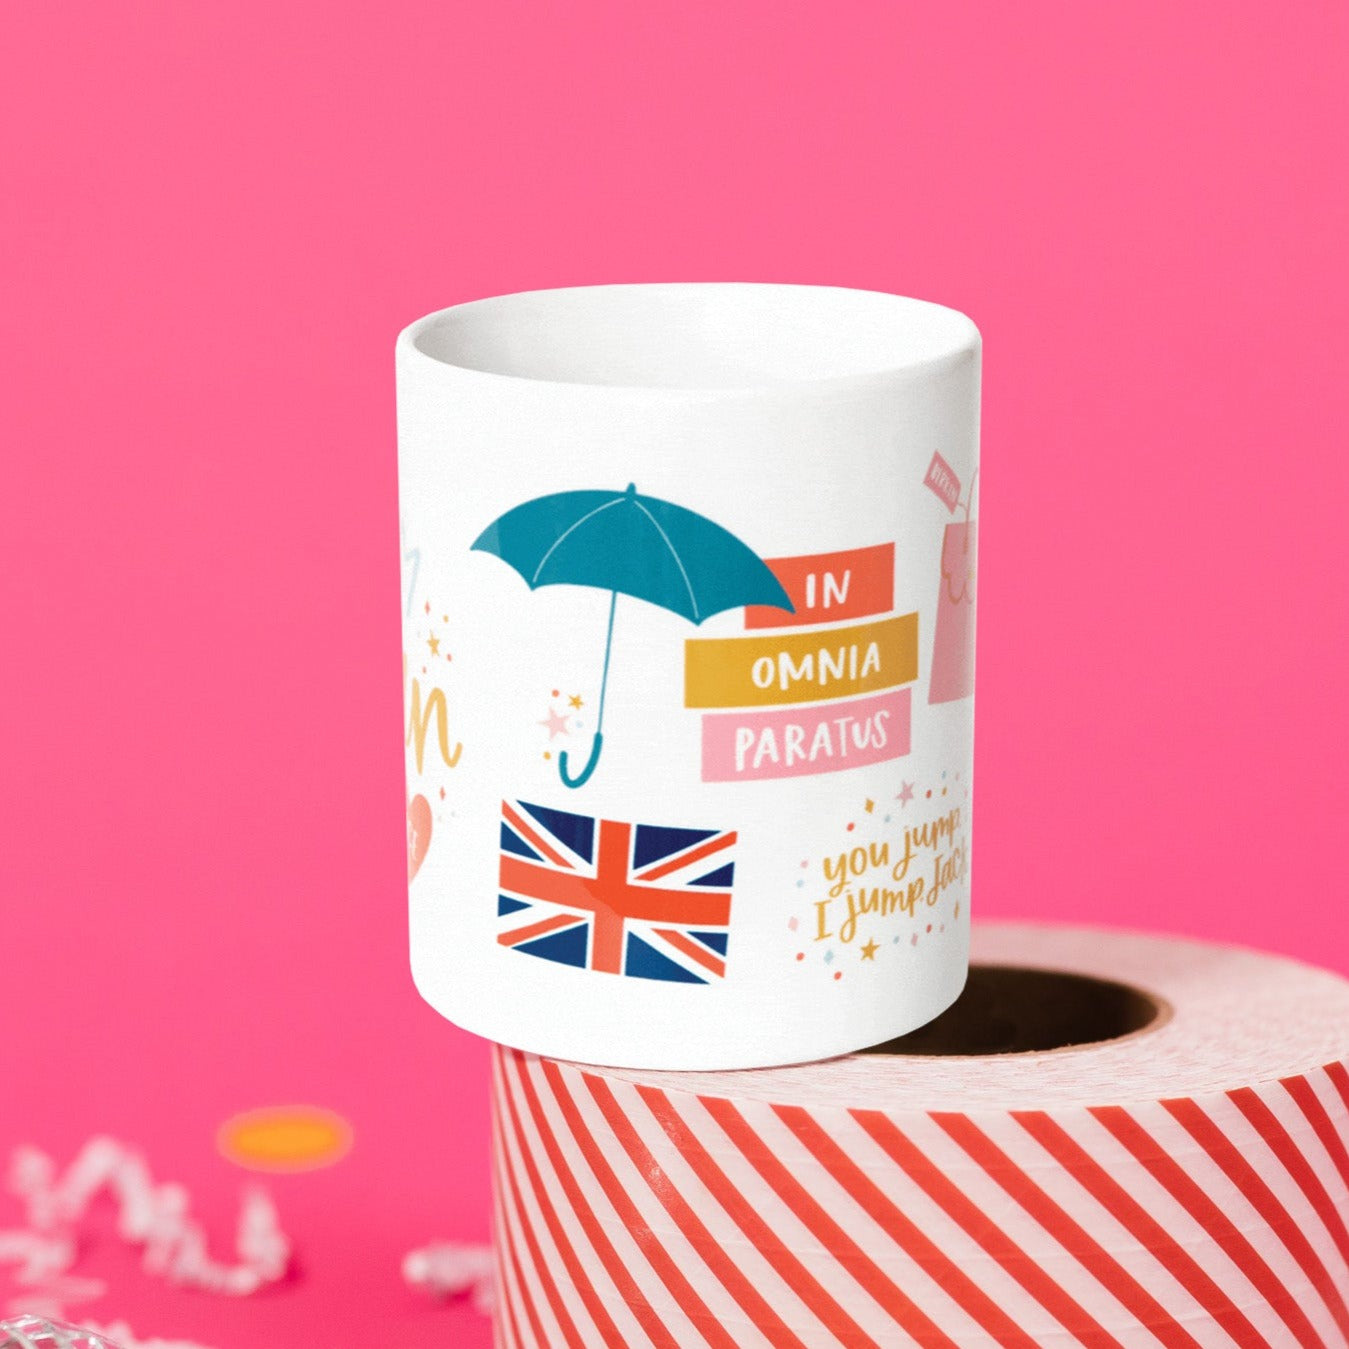 On a hot pink background sits a mug atop a red and white striped roll of packing tape with white crinkle and big, colorful confetti scattered around. There are mini disco balls. This Gilmore Girls inspired white mug has colorful illustrations. It has a teal umbrella, a Great Britain flag, colorful stars and dots and it says "you jump I jump jack.” There are three colorful rectangles. It says “IN”, "OMNIA" and “PARATUS.”